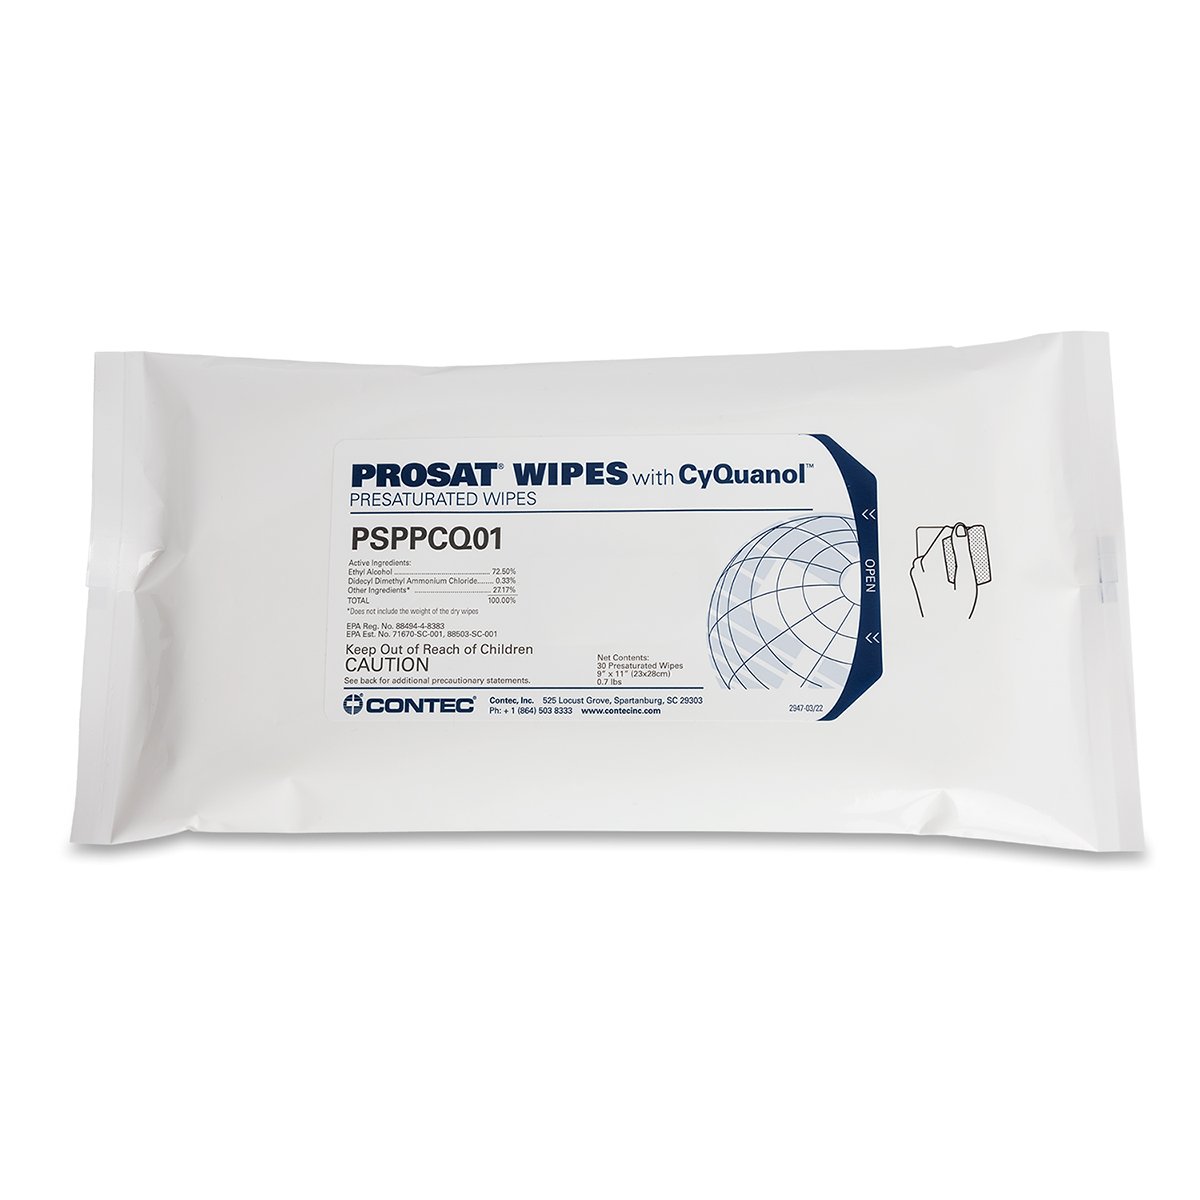 PROSAT Wipes with CyQuanol™ (Meltblown Polypropylene)-1